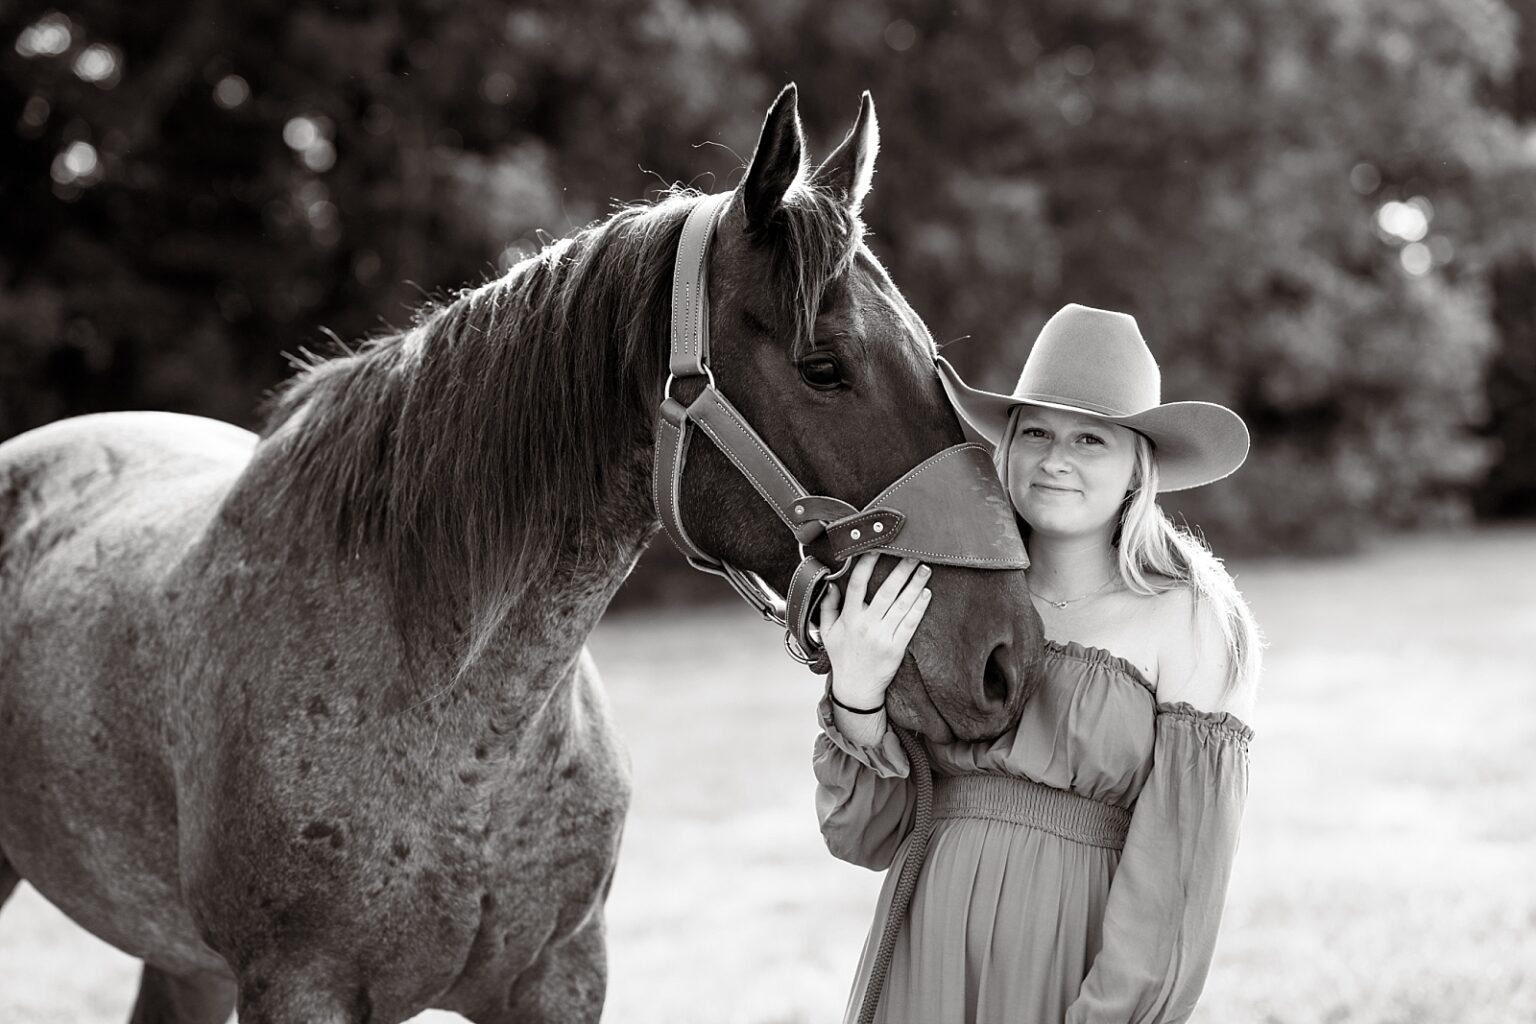 North Alabama western photographer takes pictures of cowgirl with gorgeous roan gelding near Huntsville, AL.